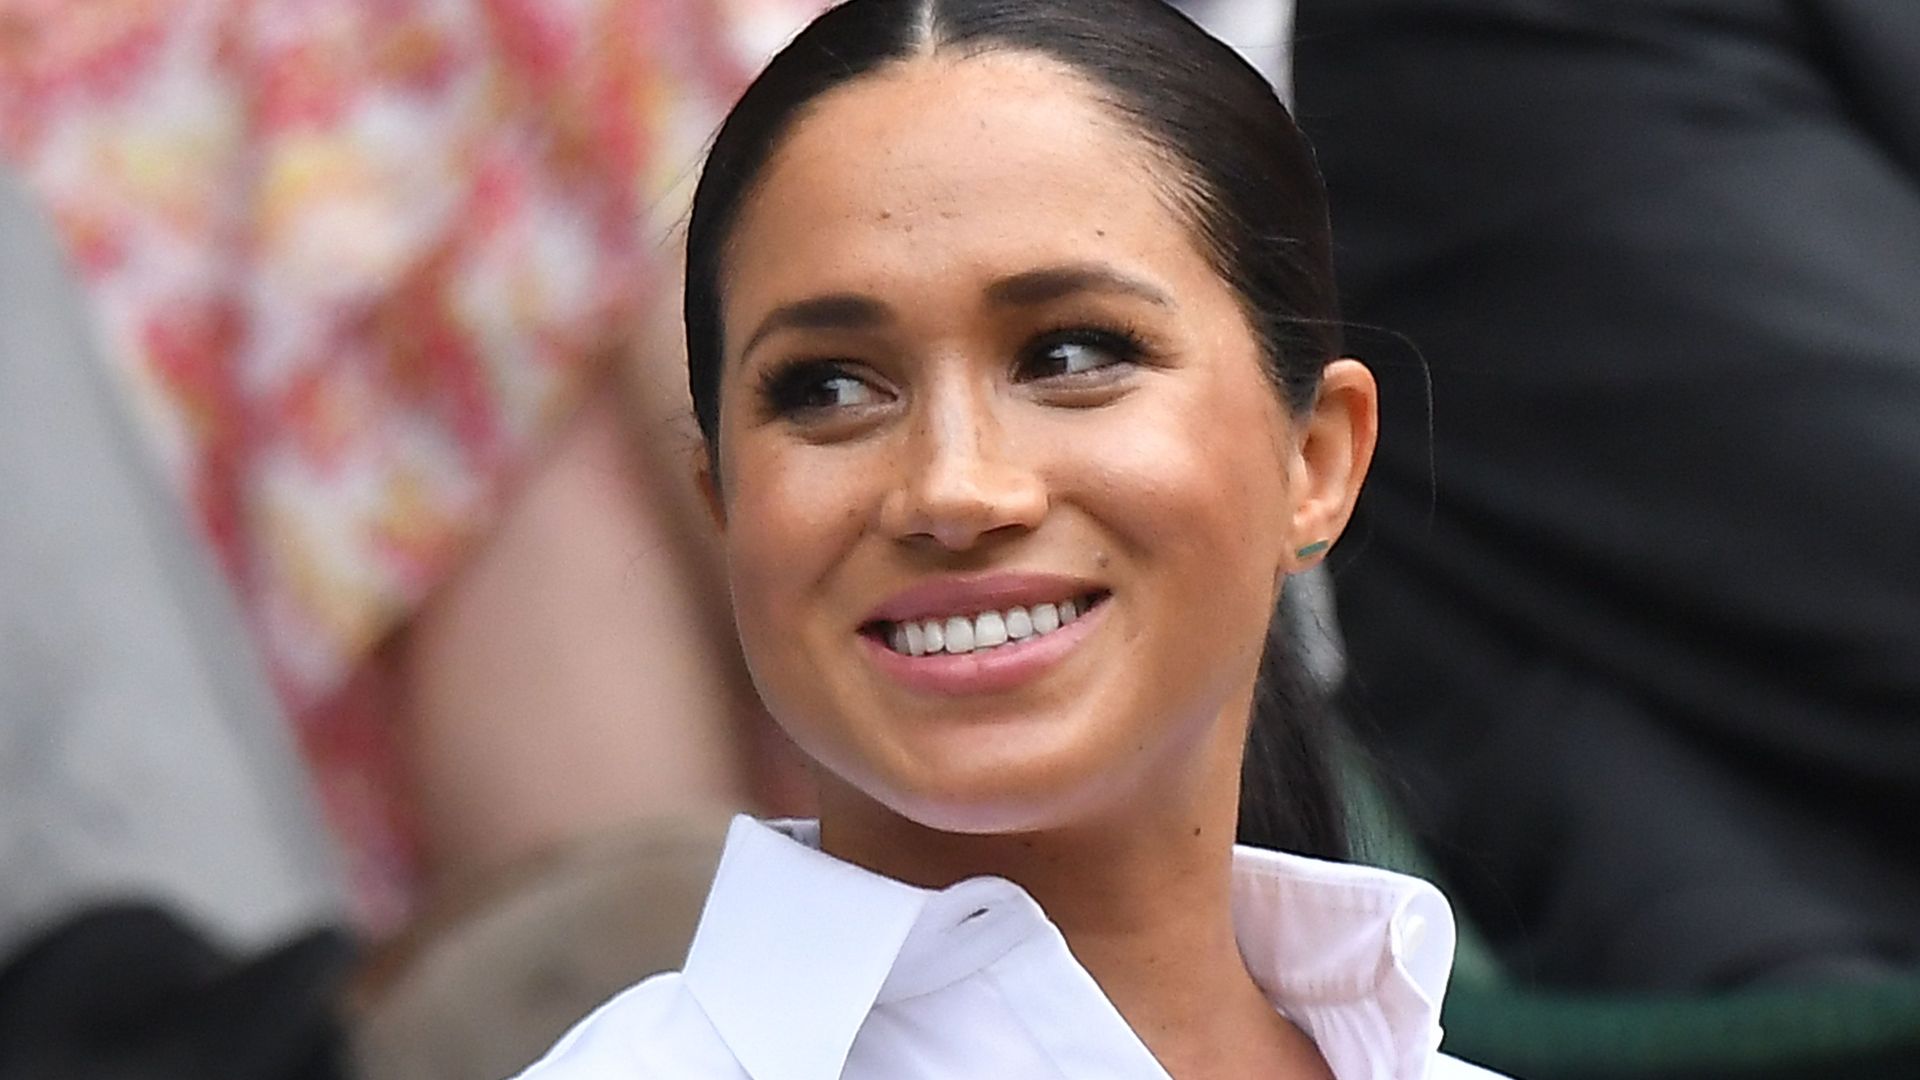 Meghan Markle's brows look natural 